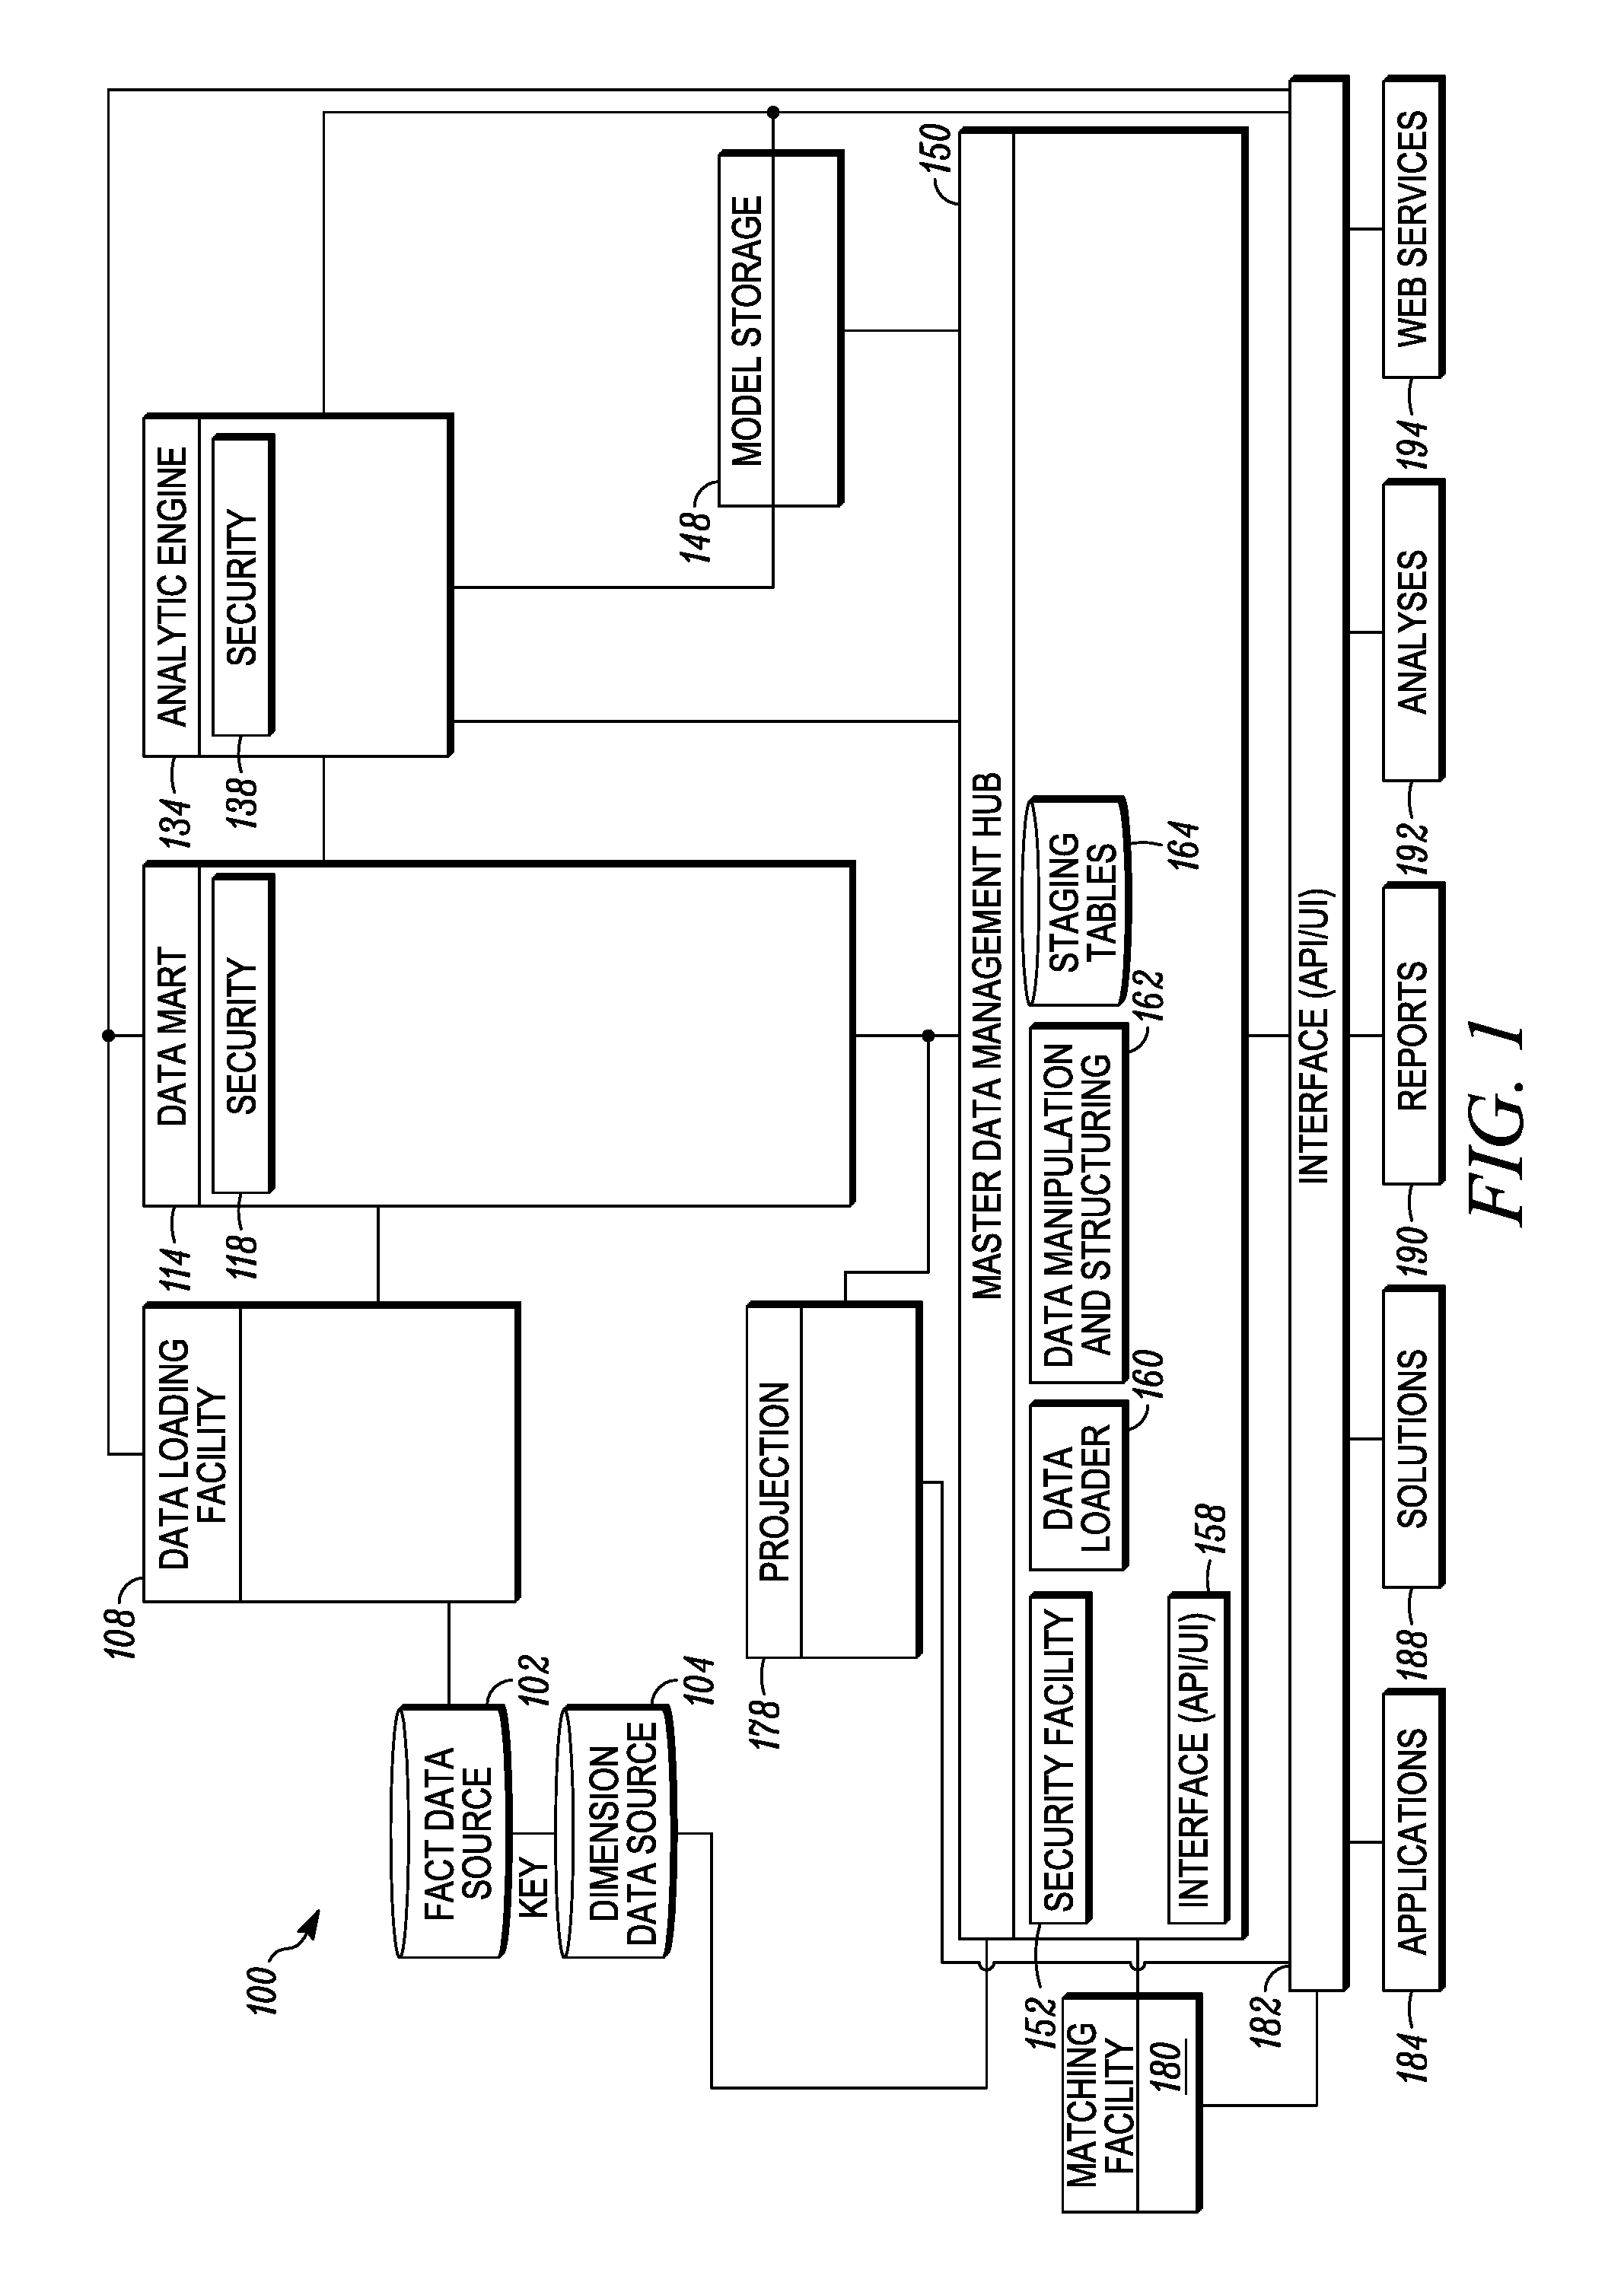 Similarity matching of products based on multiple classification schemes